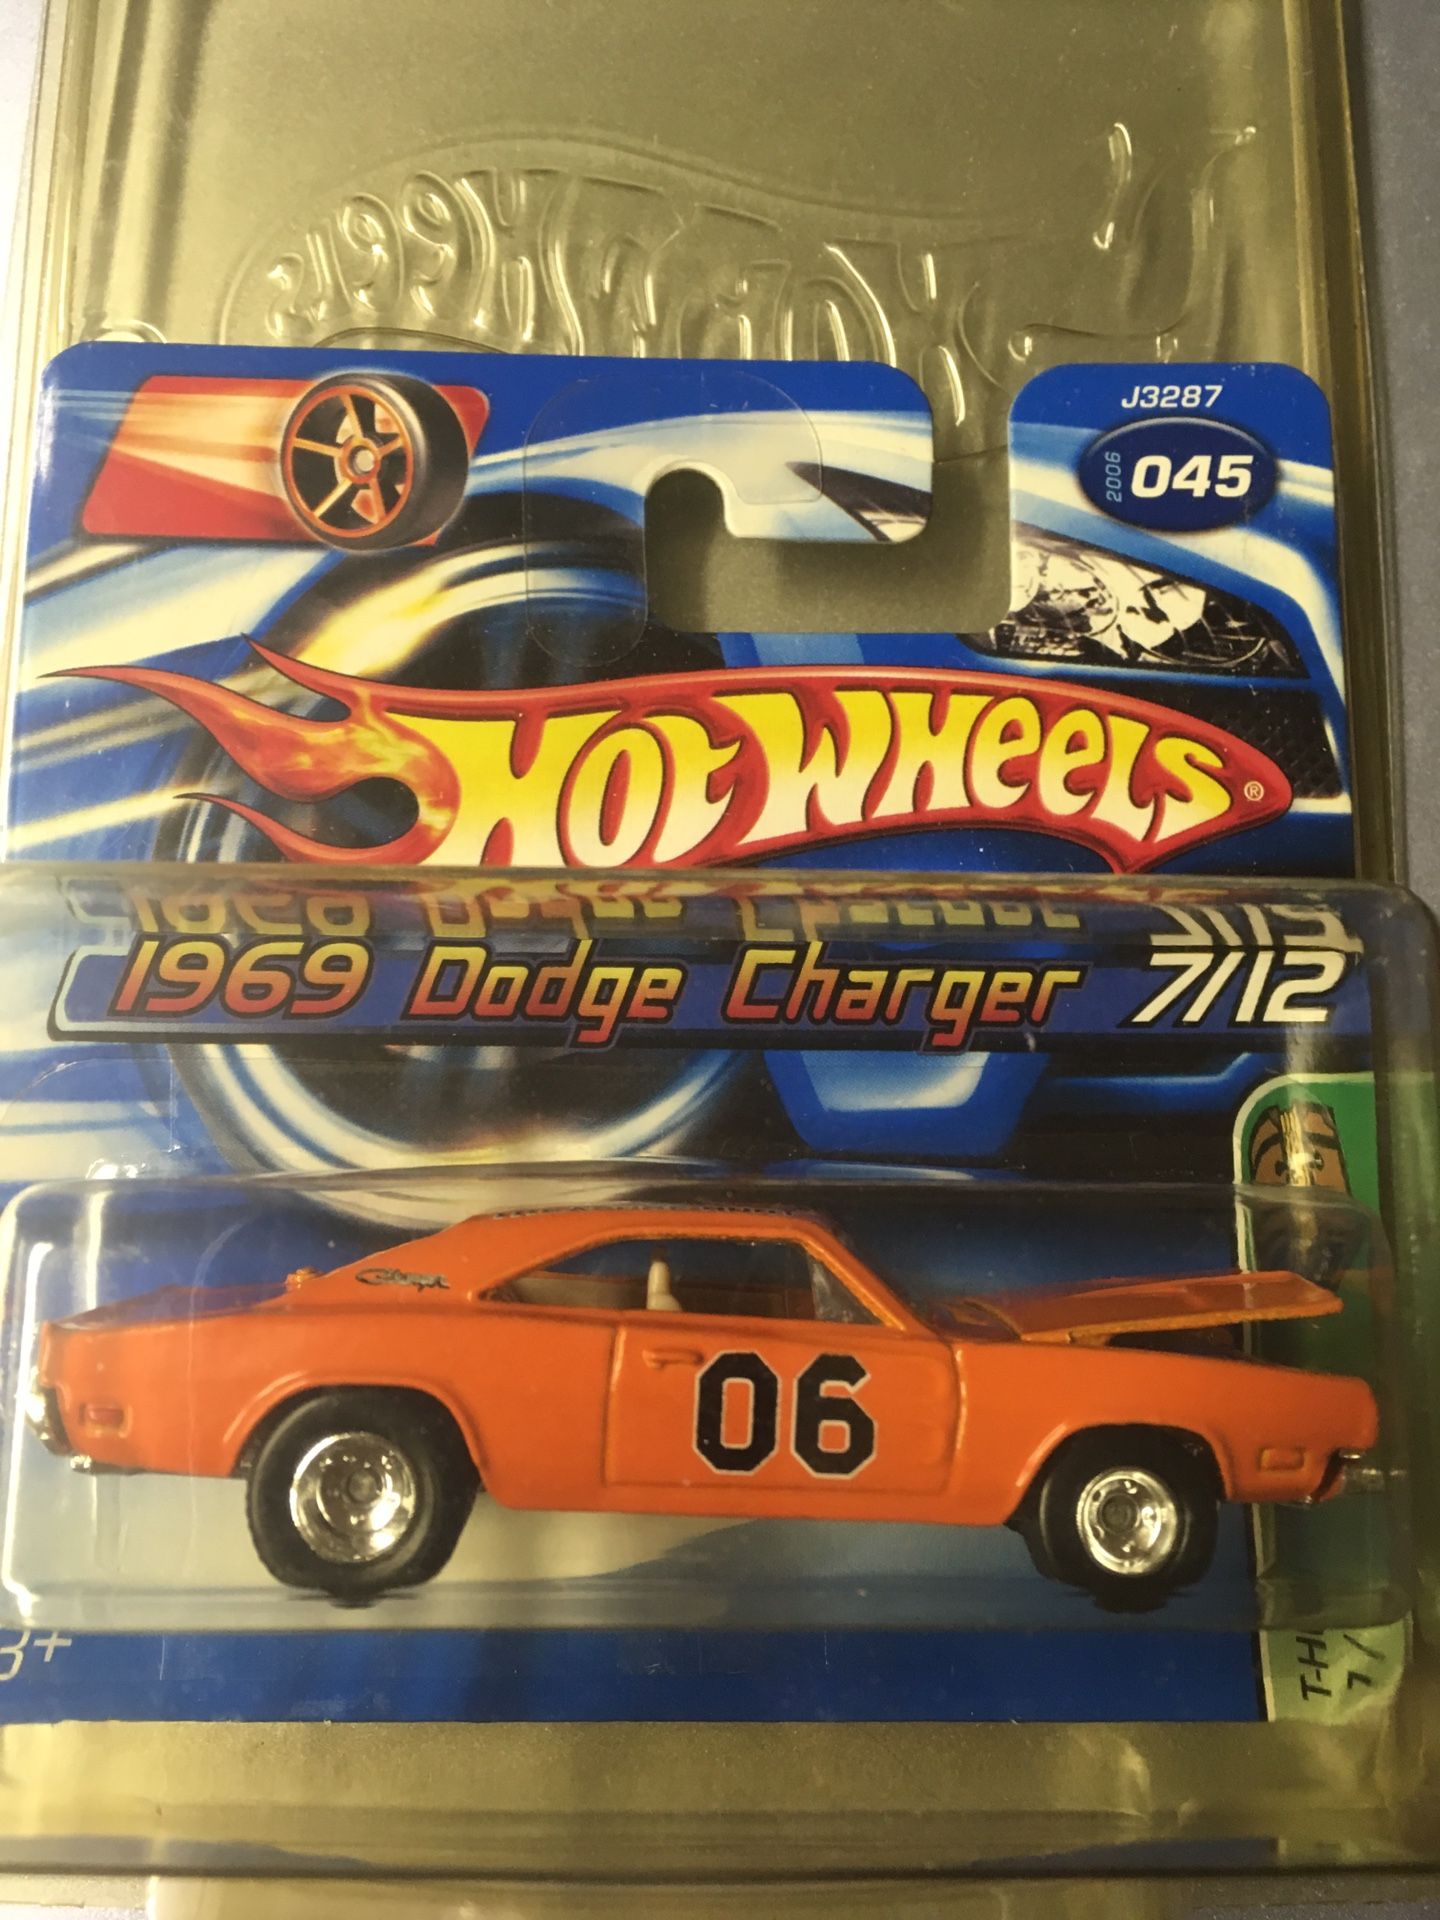 Vintage Hot Wheels Treasure Hunt Inspired by Dukes of Hazzard General Lee Toy Collection Rare short card. Pleas Note: shelf ware on lower right corner